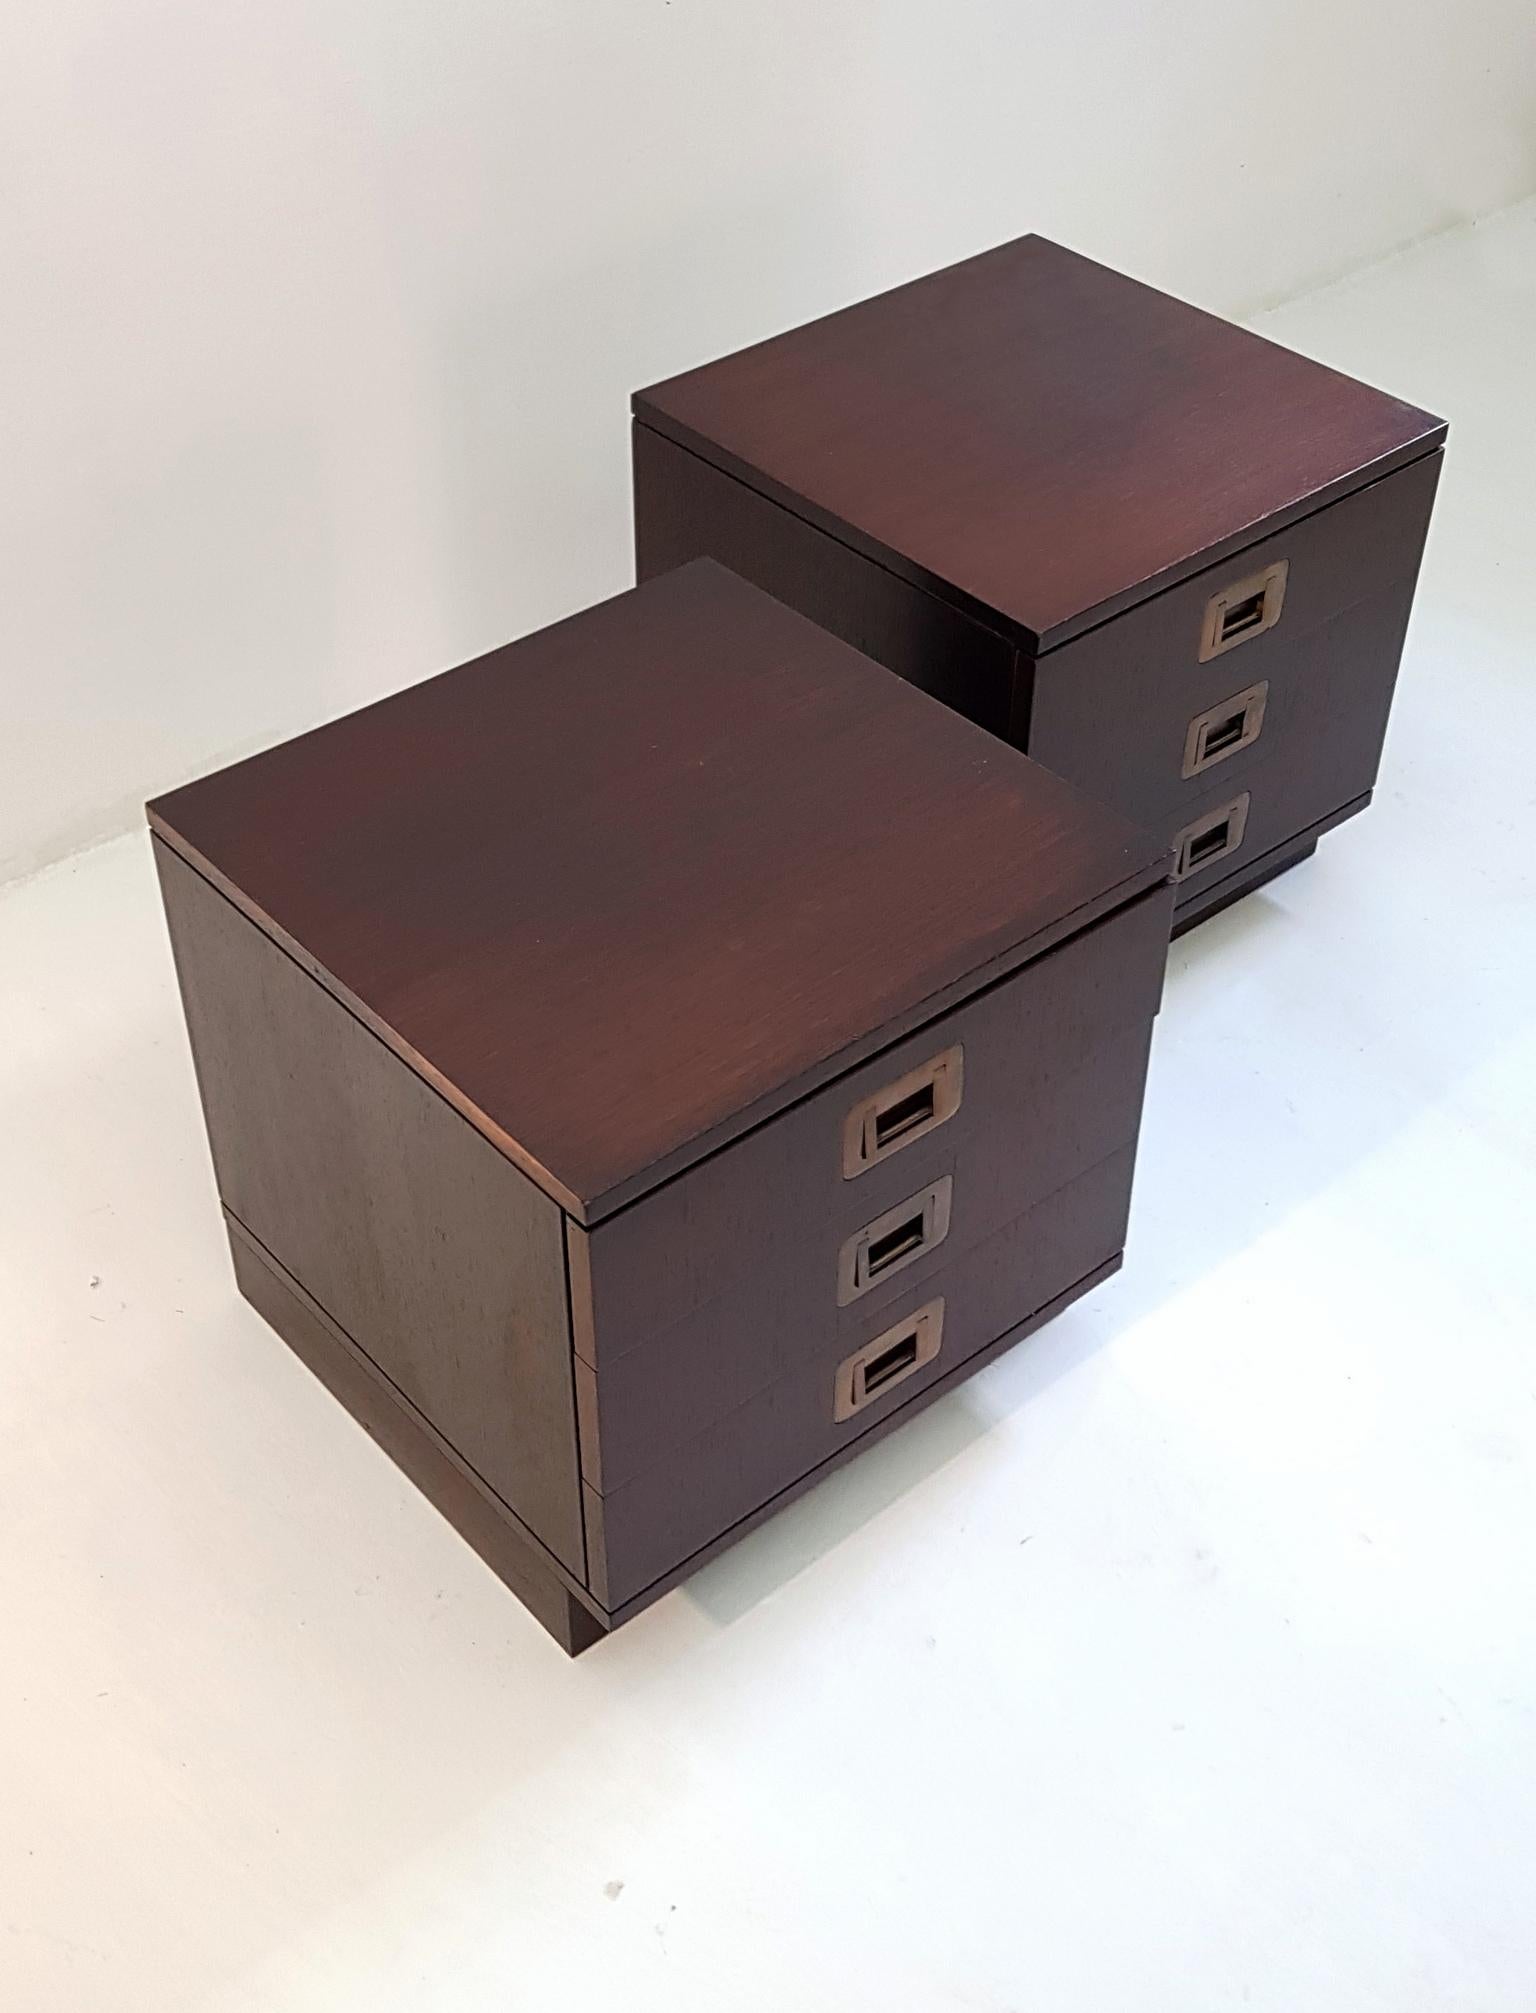 A pair of side tables in teak and brass from the 'Parisi 1' series Cantù, late 1950s. Professionally restored and in great condition. Original tag still in place.

Bibliografia/Literature R. Lietti, Ico Parisi Design. Catalogo generale 1936-1960,